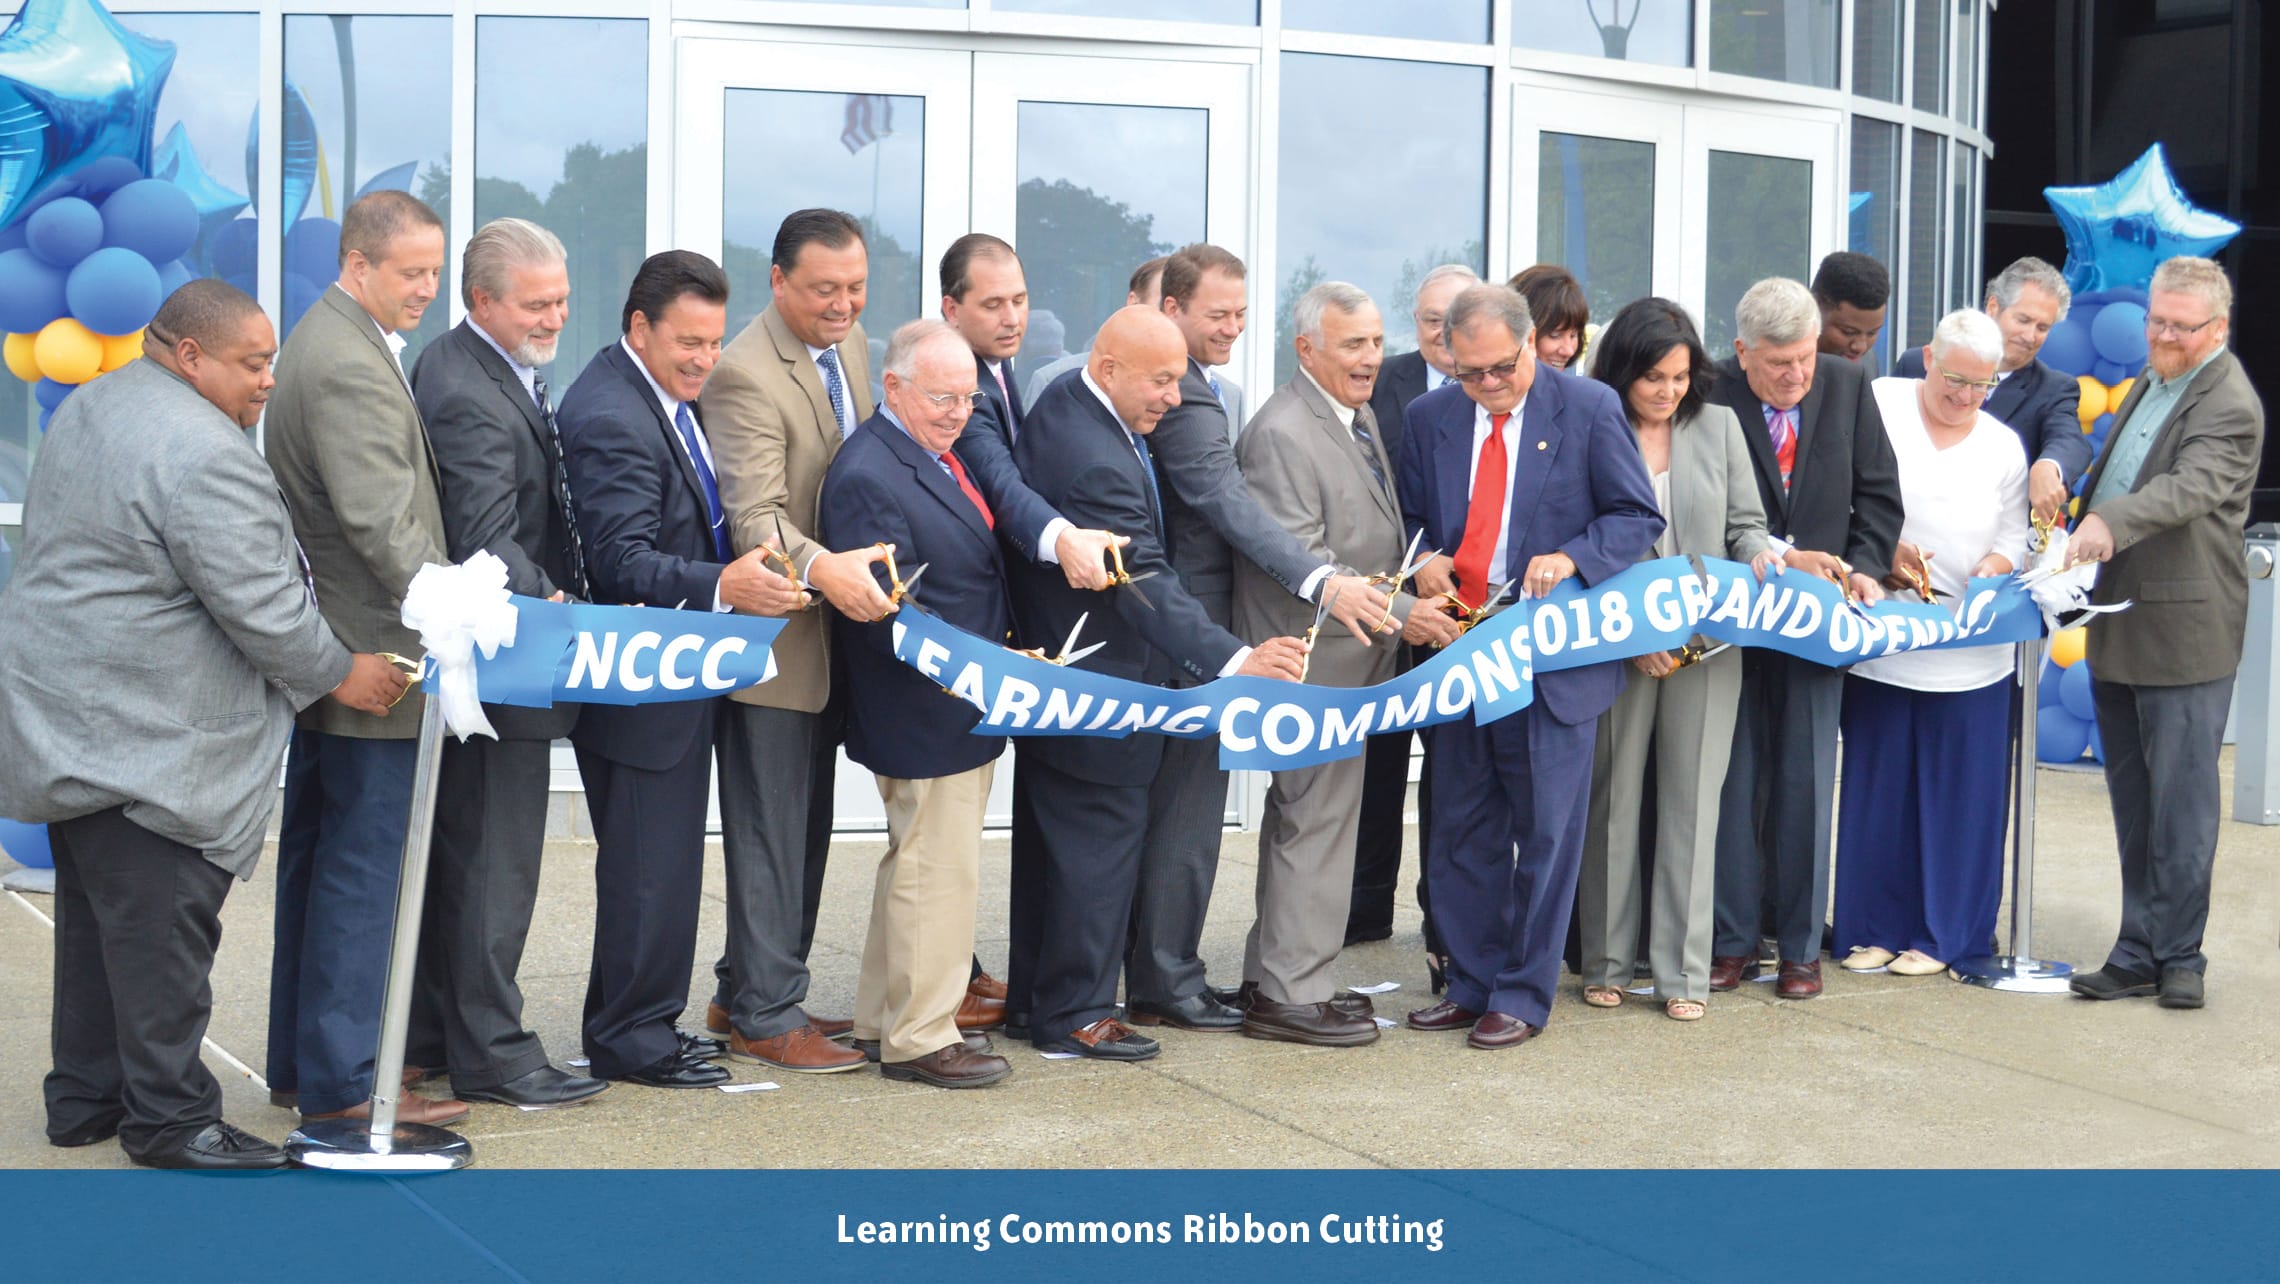 Learning Commons Ribbon Cutting